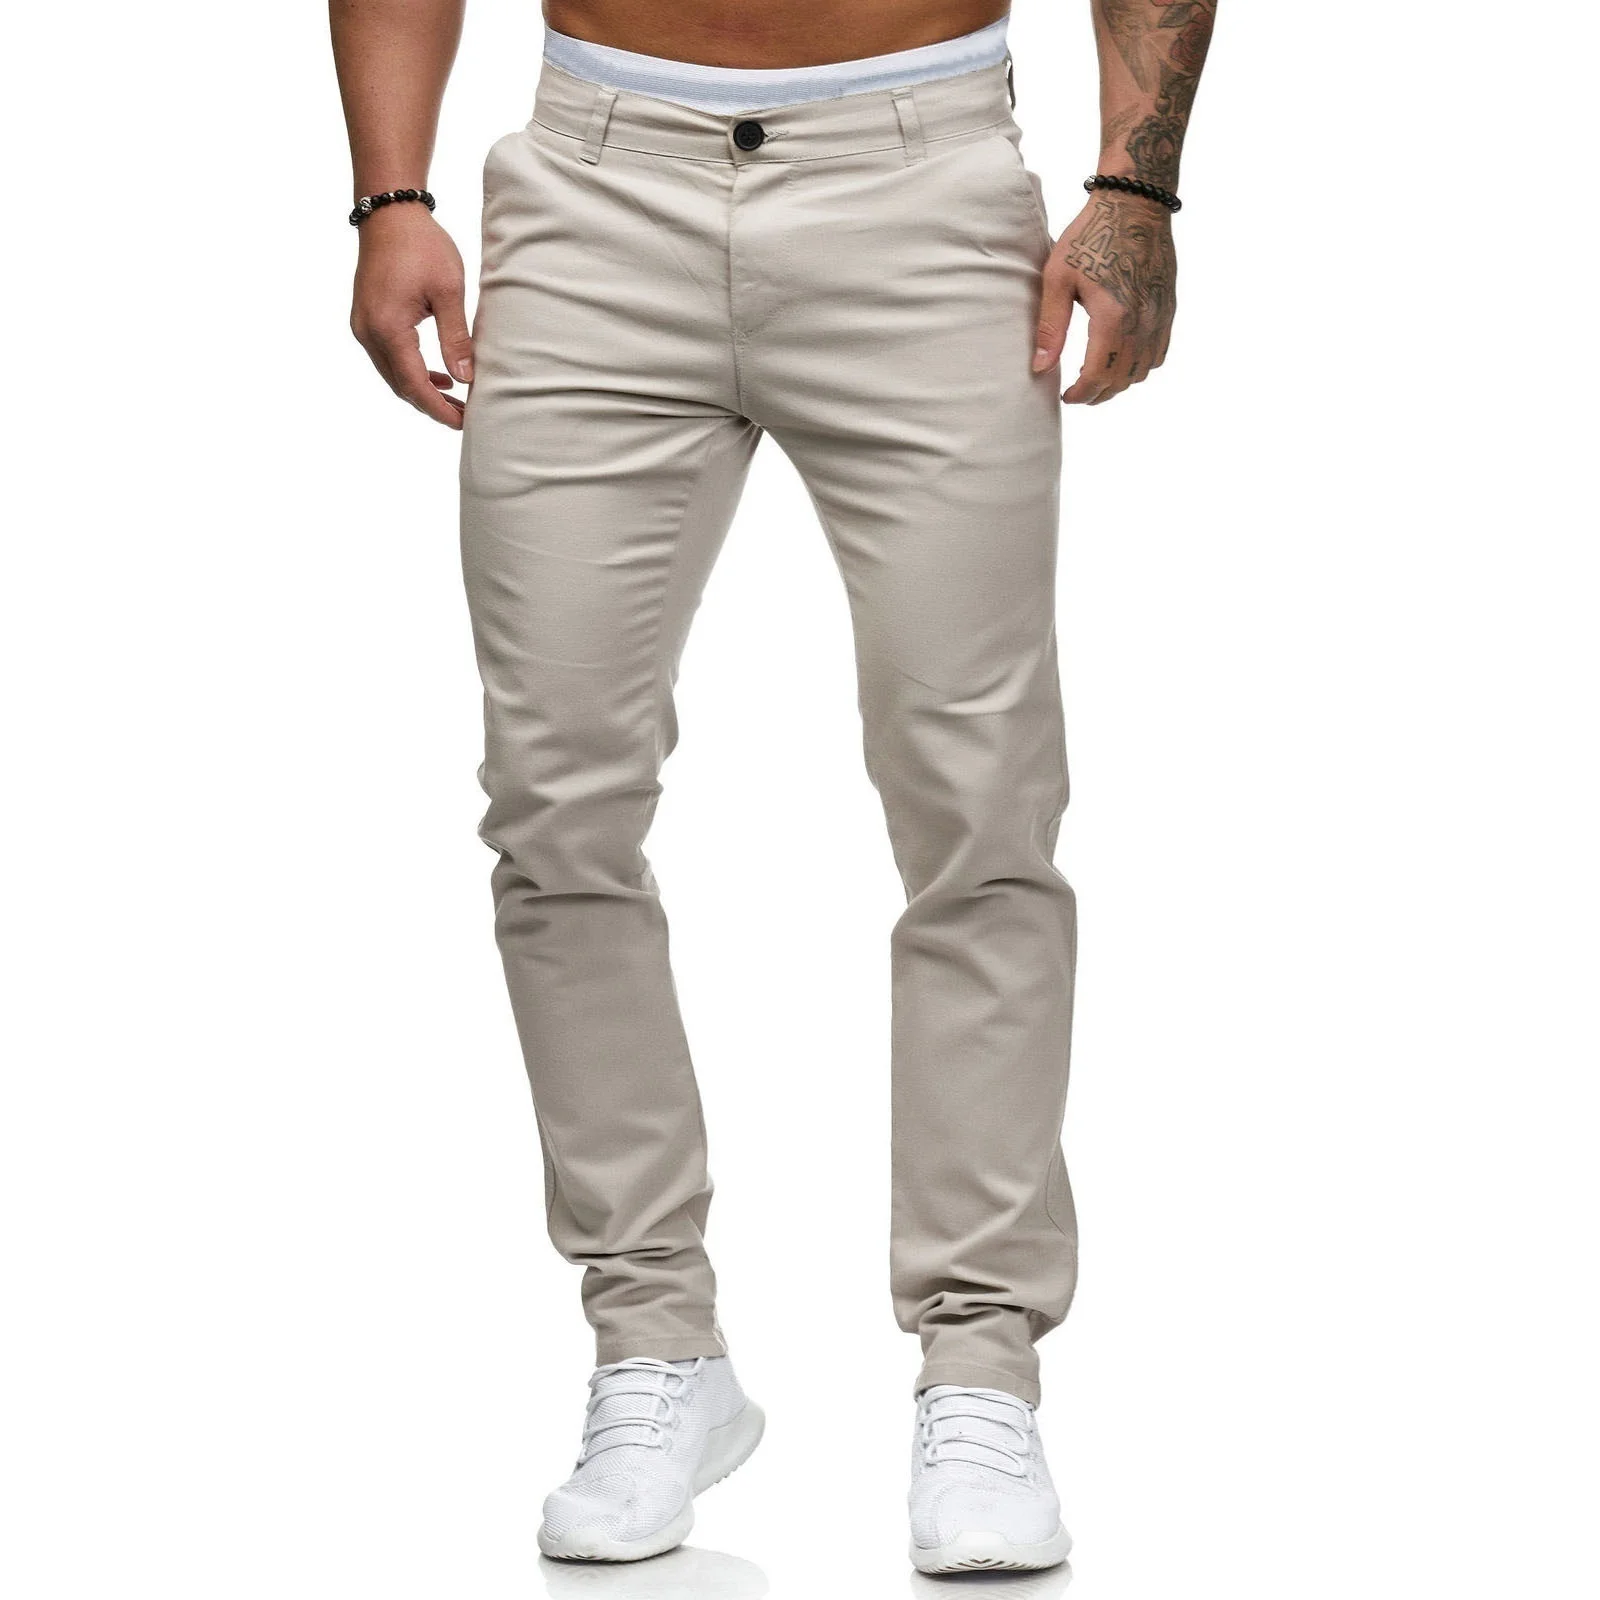 2022 New Men's Solid Color Casual Cotton Trousers Slim Straight Business Pants All-match Trousers